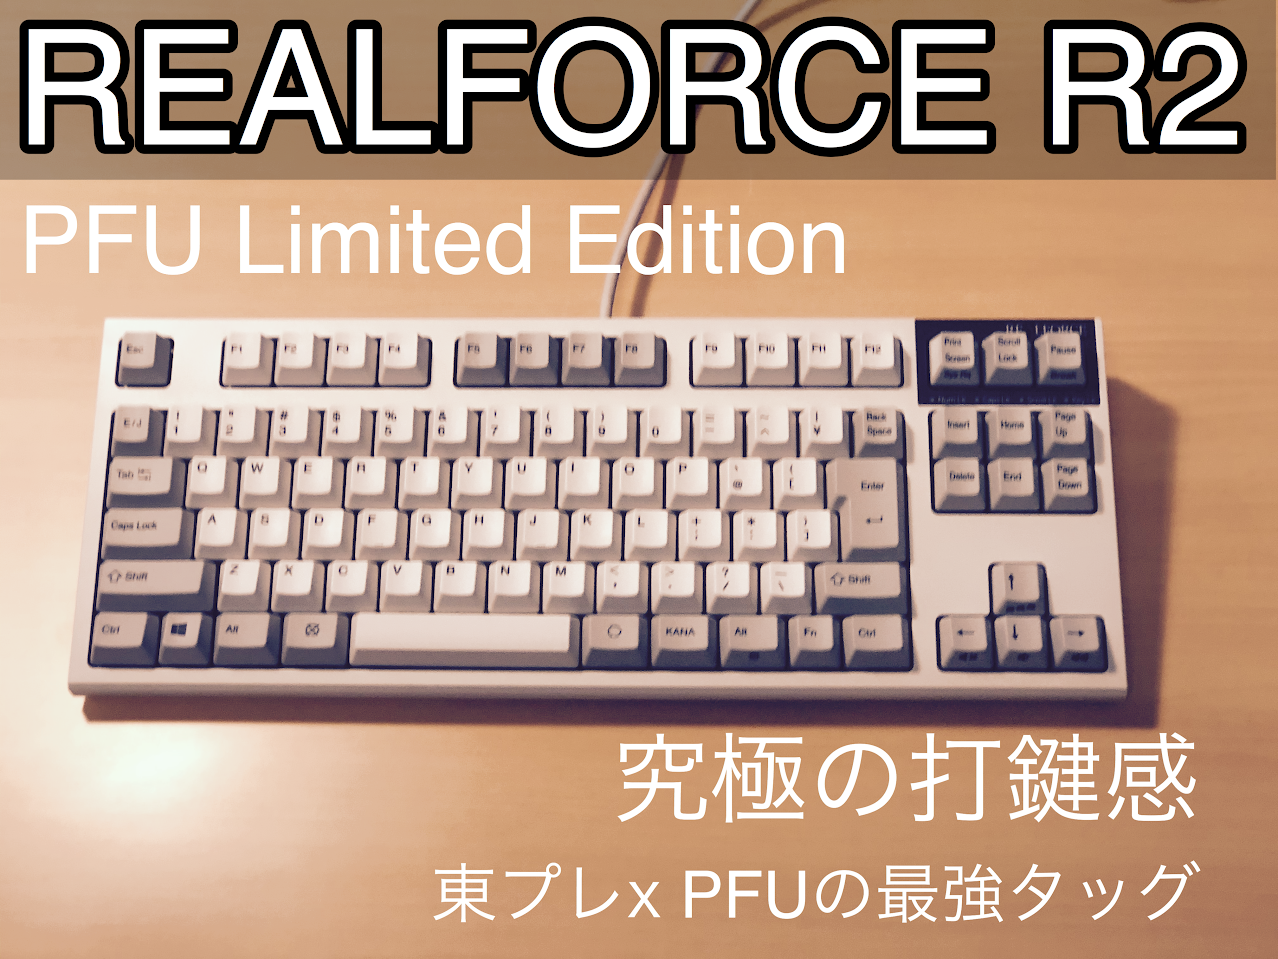 PFU Limited Edition サムネイル